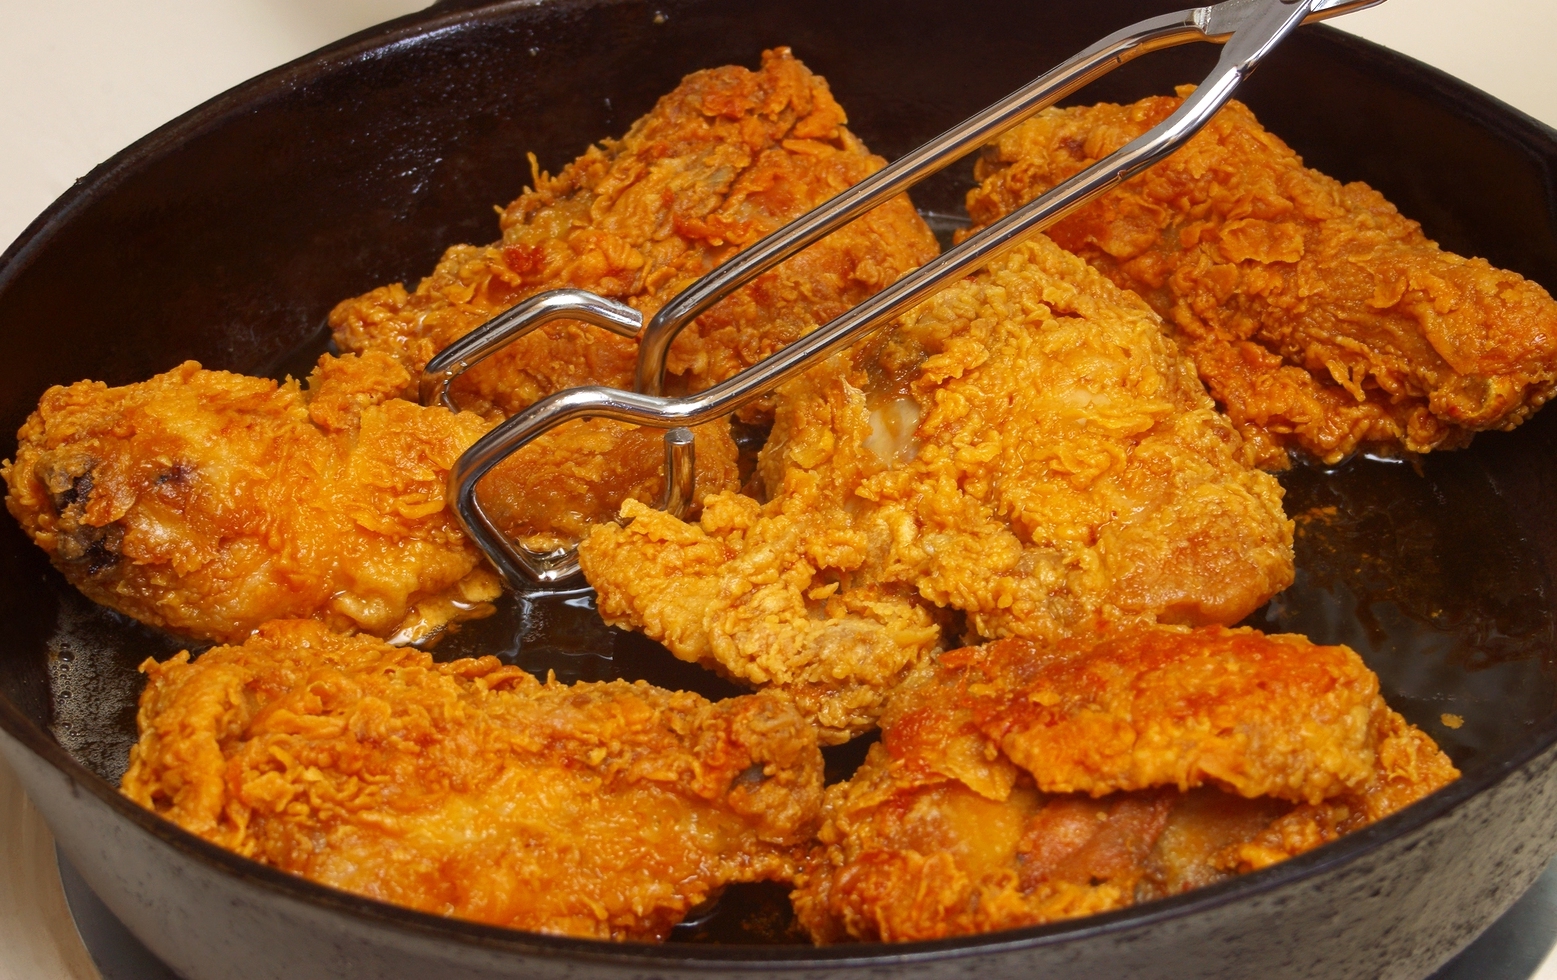 Chicken cooking in a cast-iron frying pan